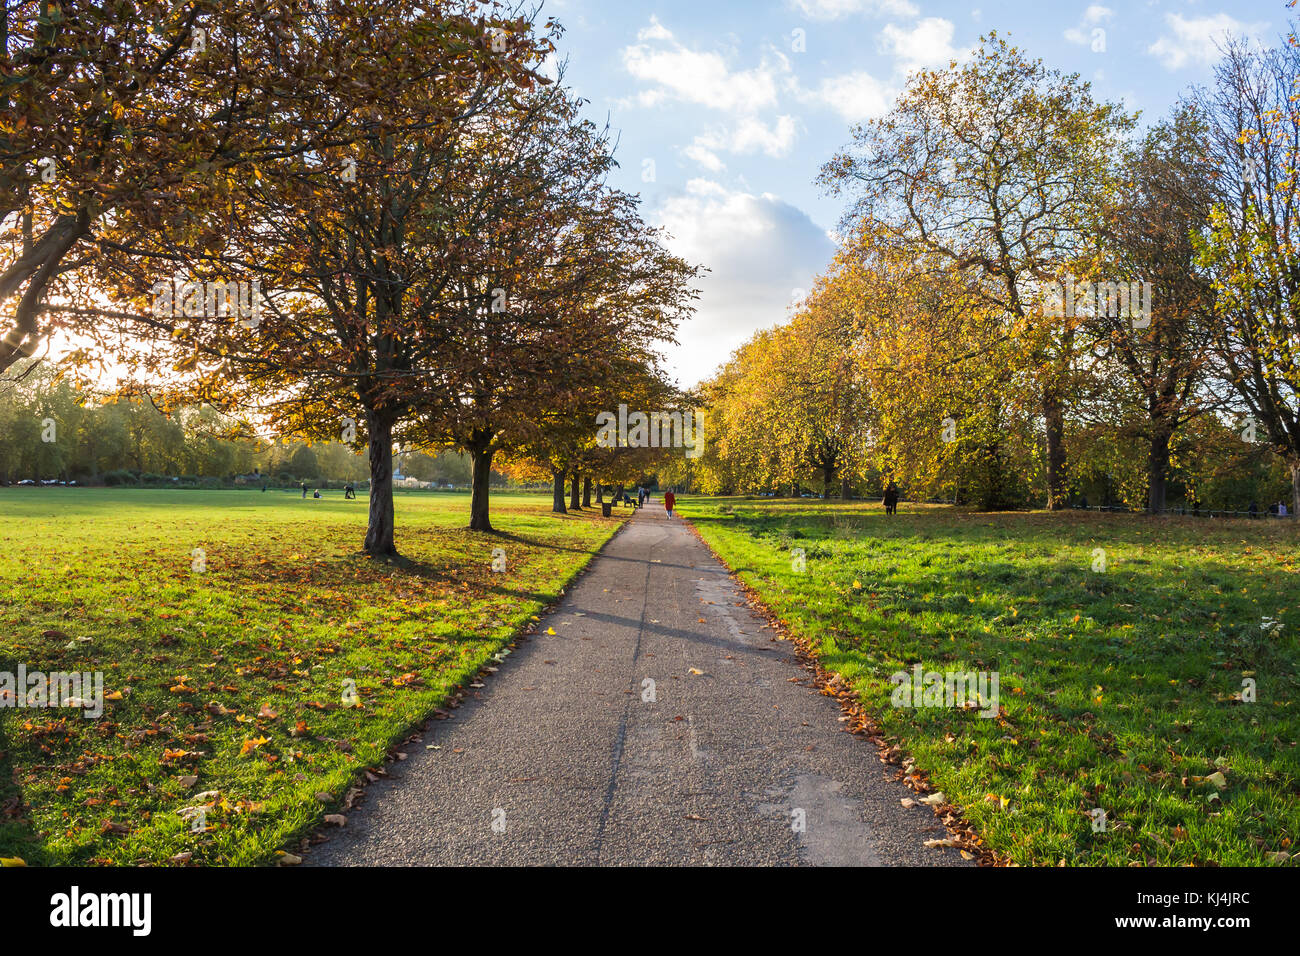 Beautiful autumn scene in the park with a row of trees with changing leaves and soft sunlight. Long pathway with no people. Stock Photo